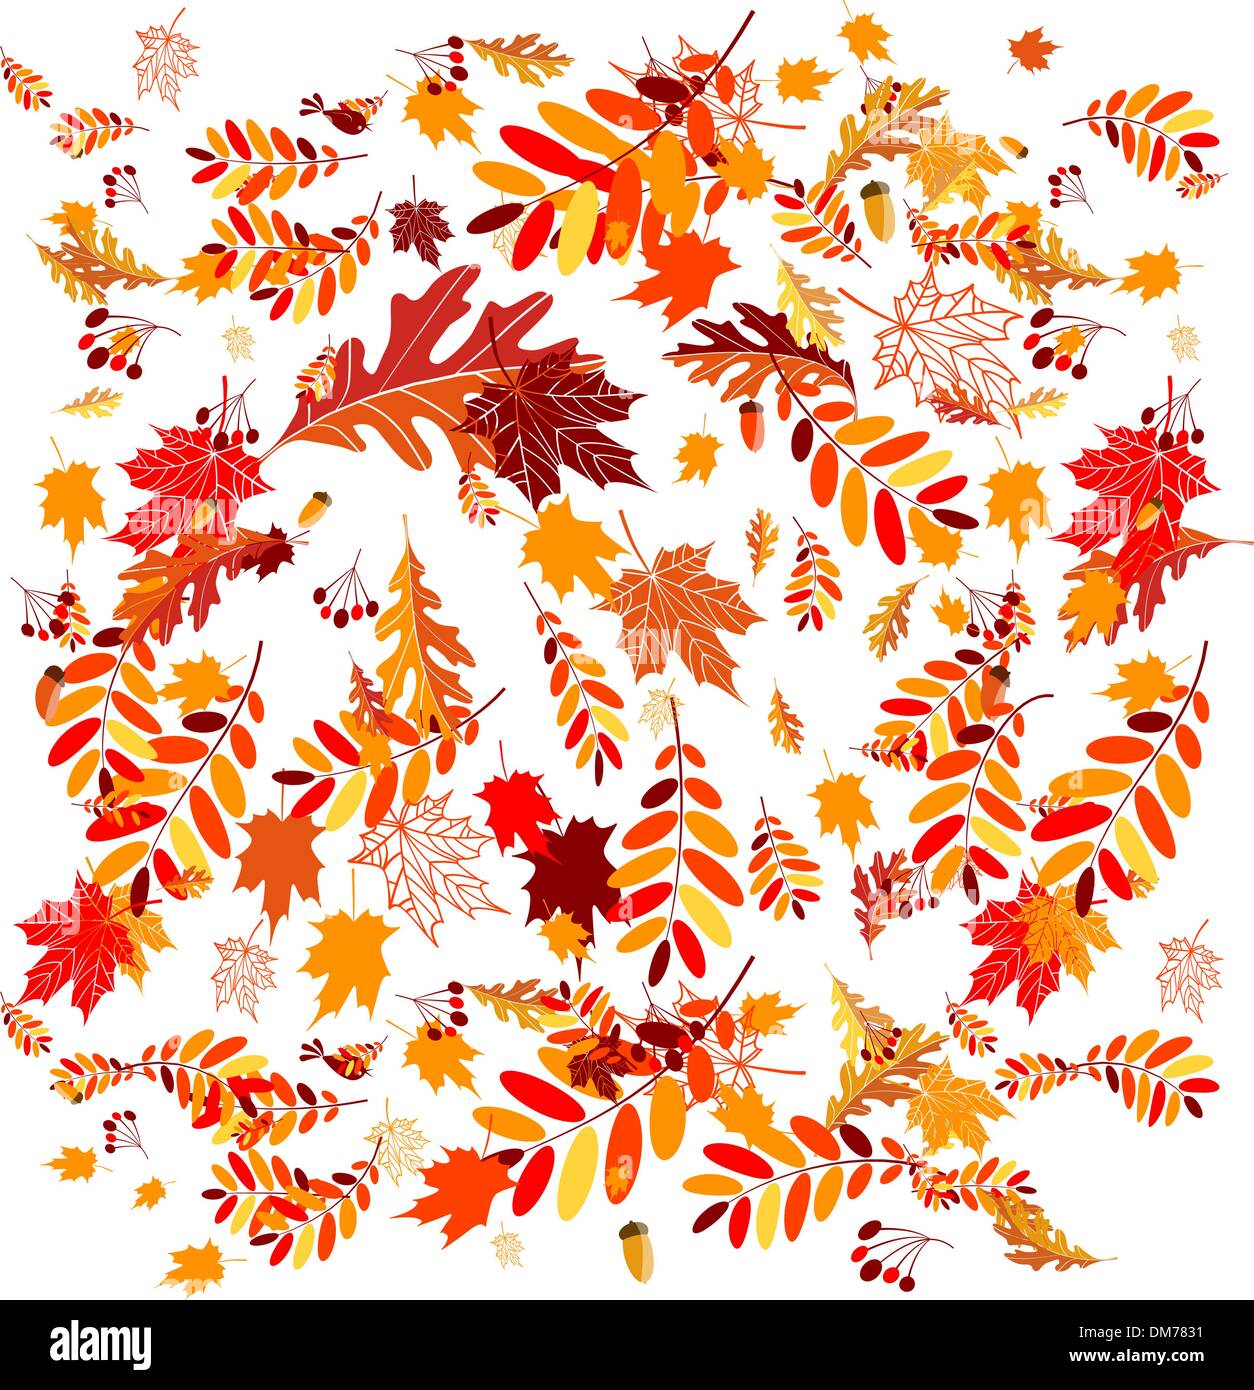 Autumn leaves background for your design Stock Vector